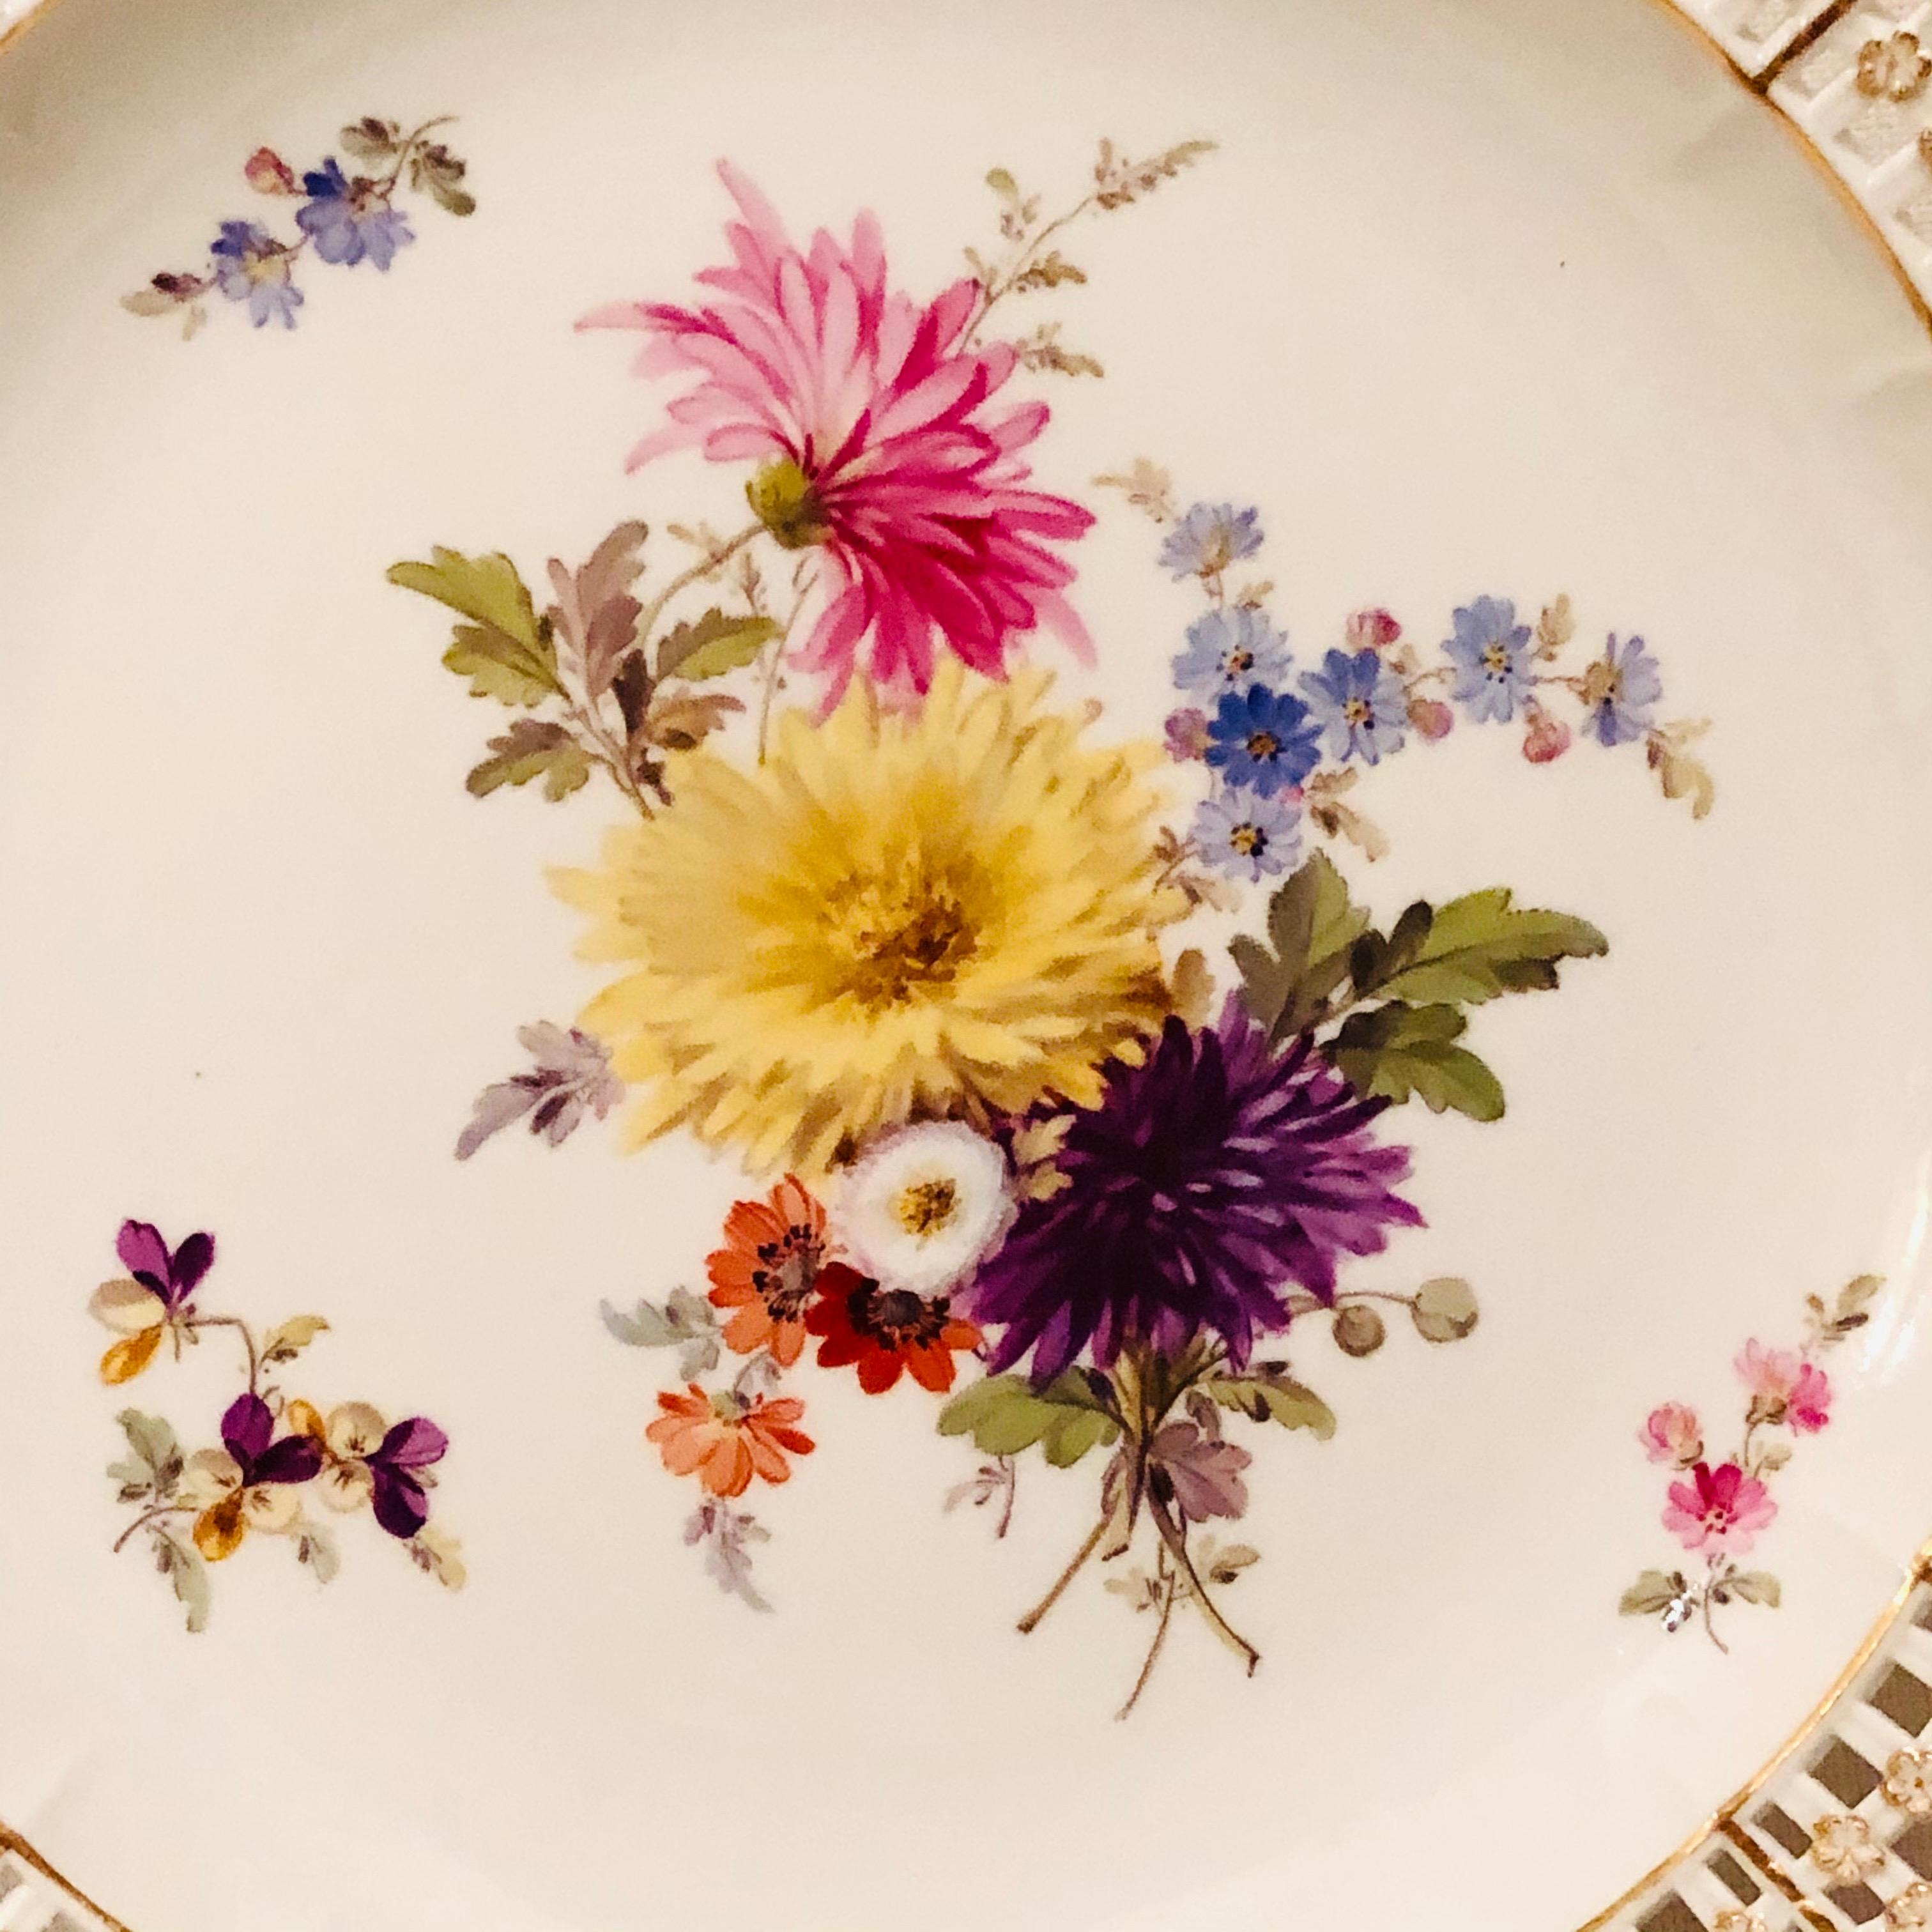 This is an exquisite Meissen cabinet plate painted with a large beautiful flower bouquet. The Meissen plate has a very intricate reticulated or open work border profusely decorated with raised gold and blue forget me nots. This Meissen plate is from